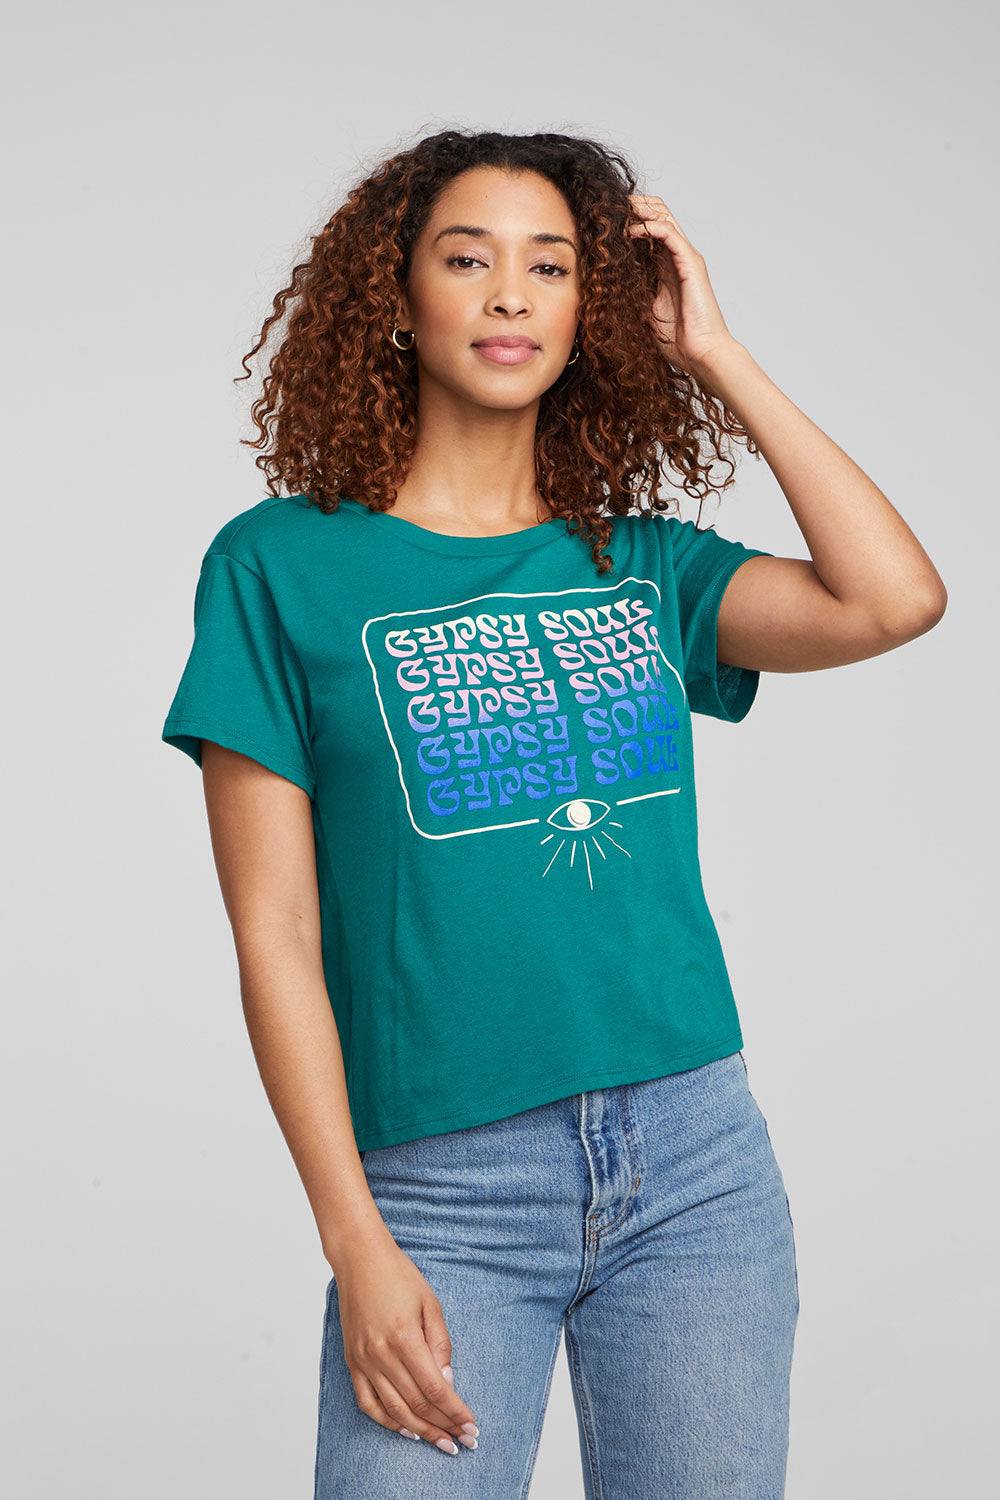 Gypsy Soul Tee WOMENS chaserbrand